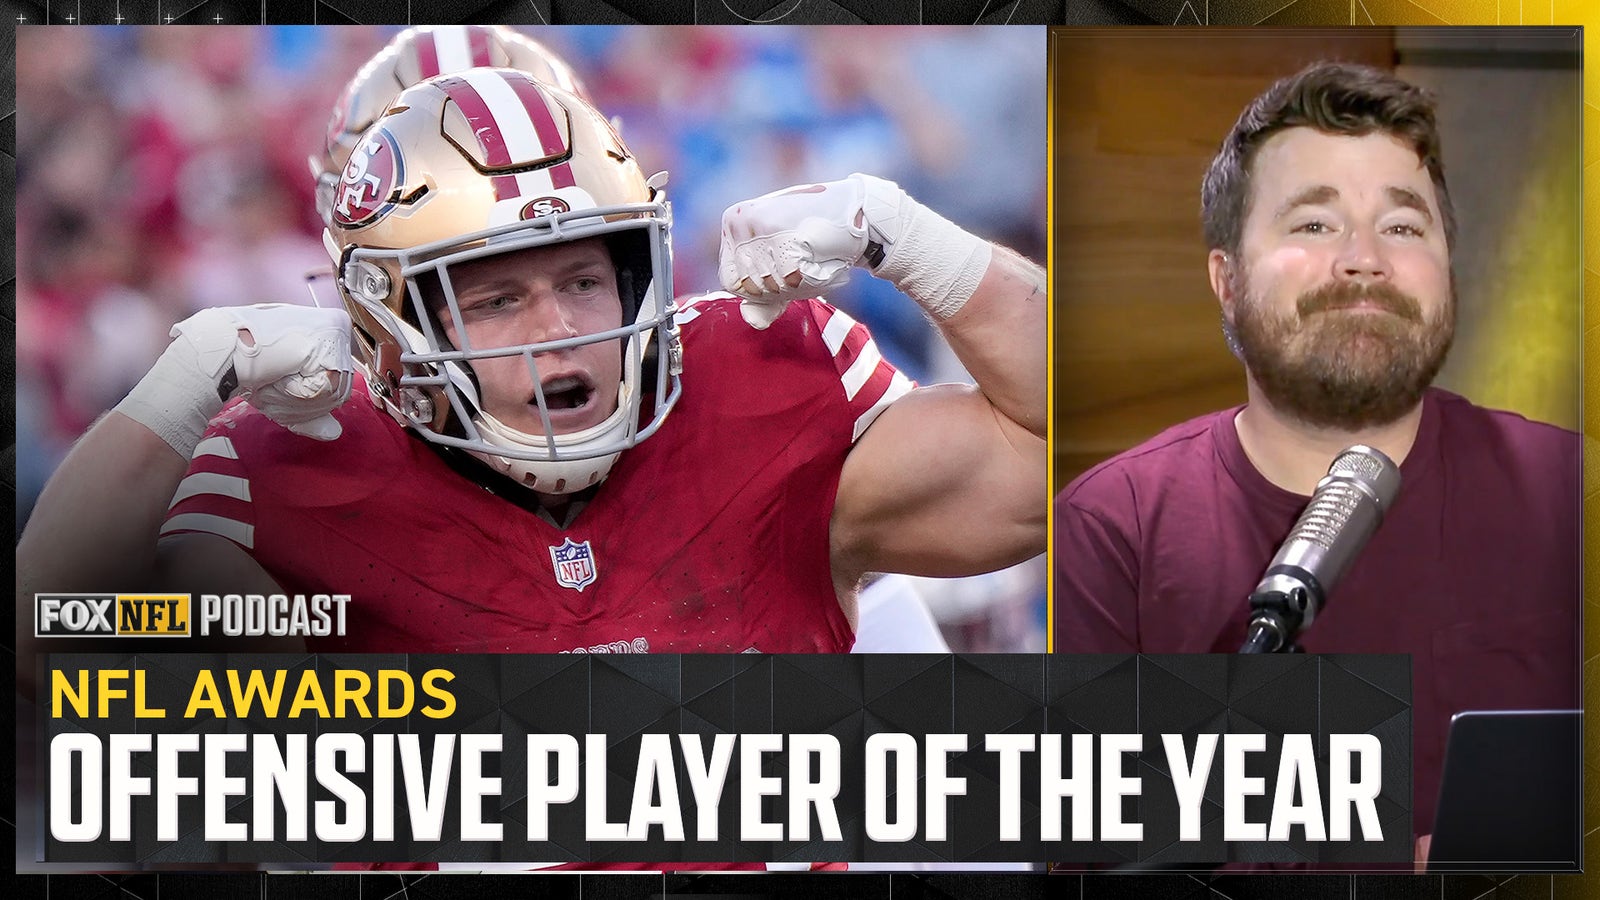 Christian McCaffrey wins NFL on FOX Pod's Offensive Player of the Year